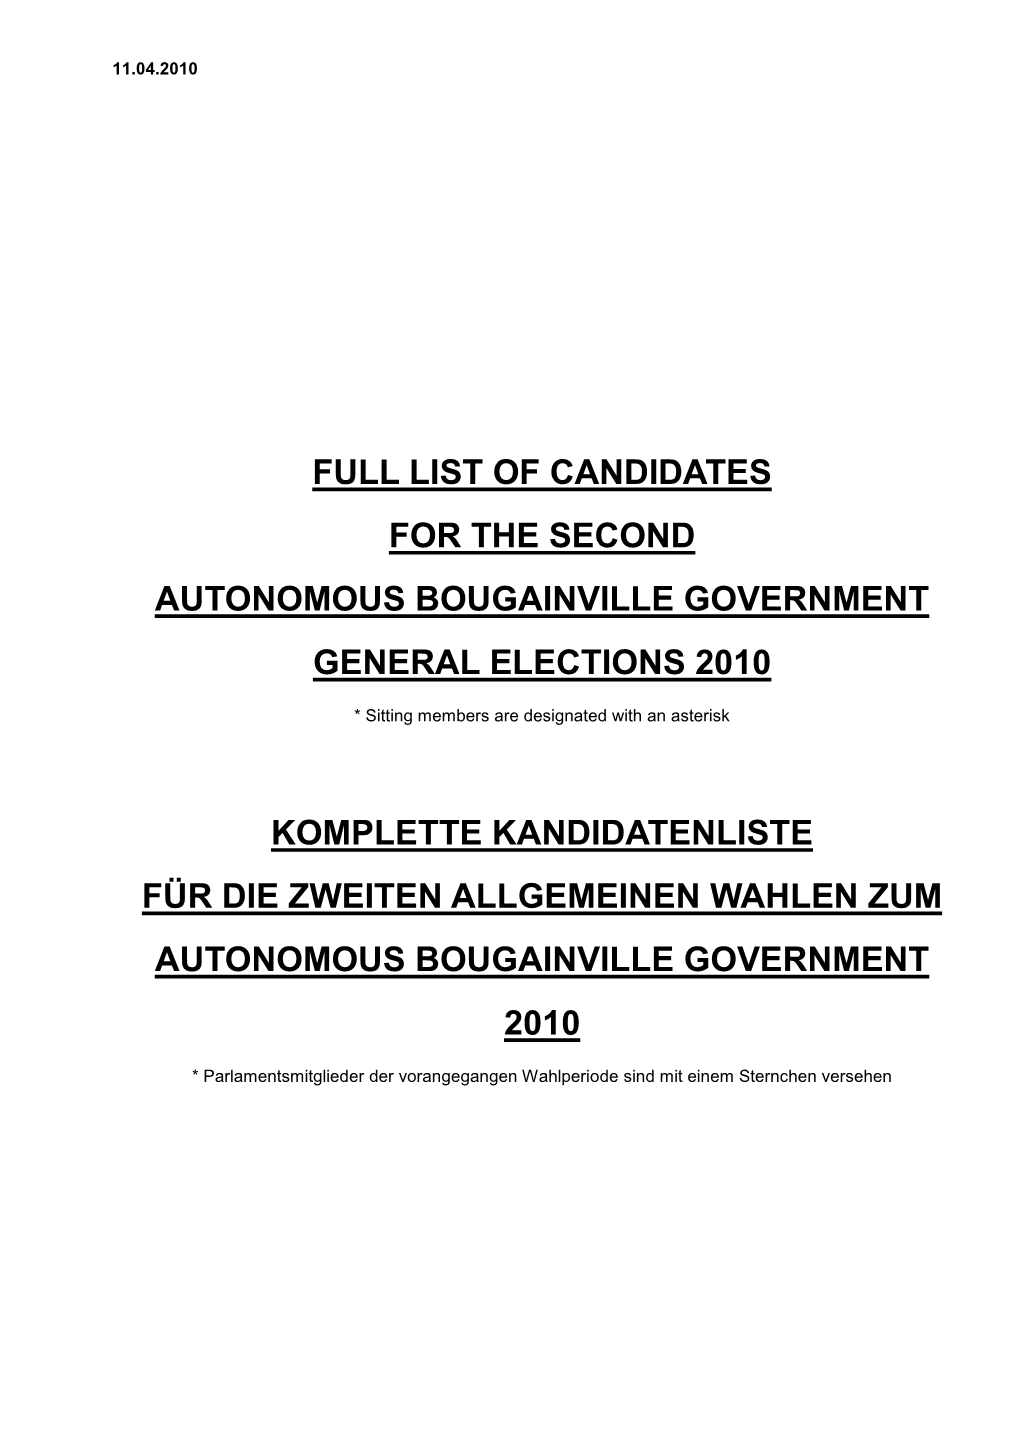 Full List of Candidates for the Second Autonomous Bougainville Government General Elections 2010